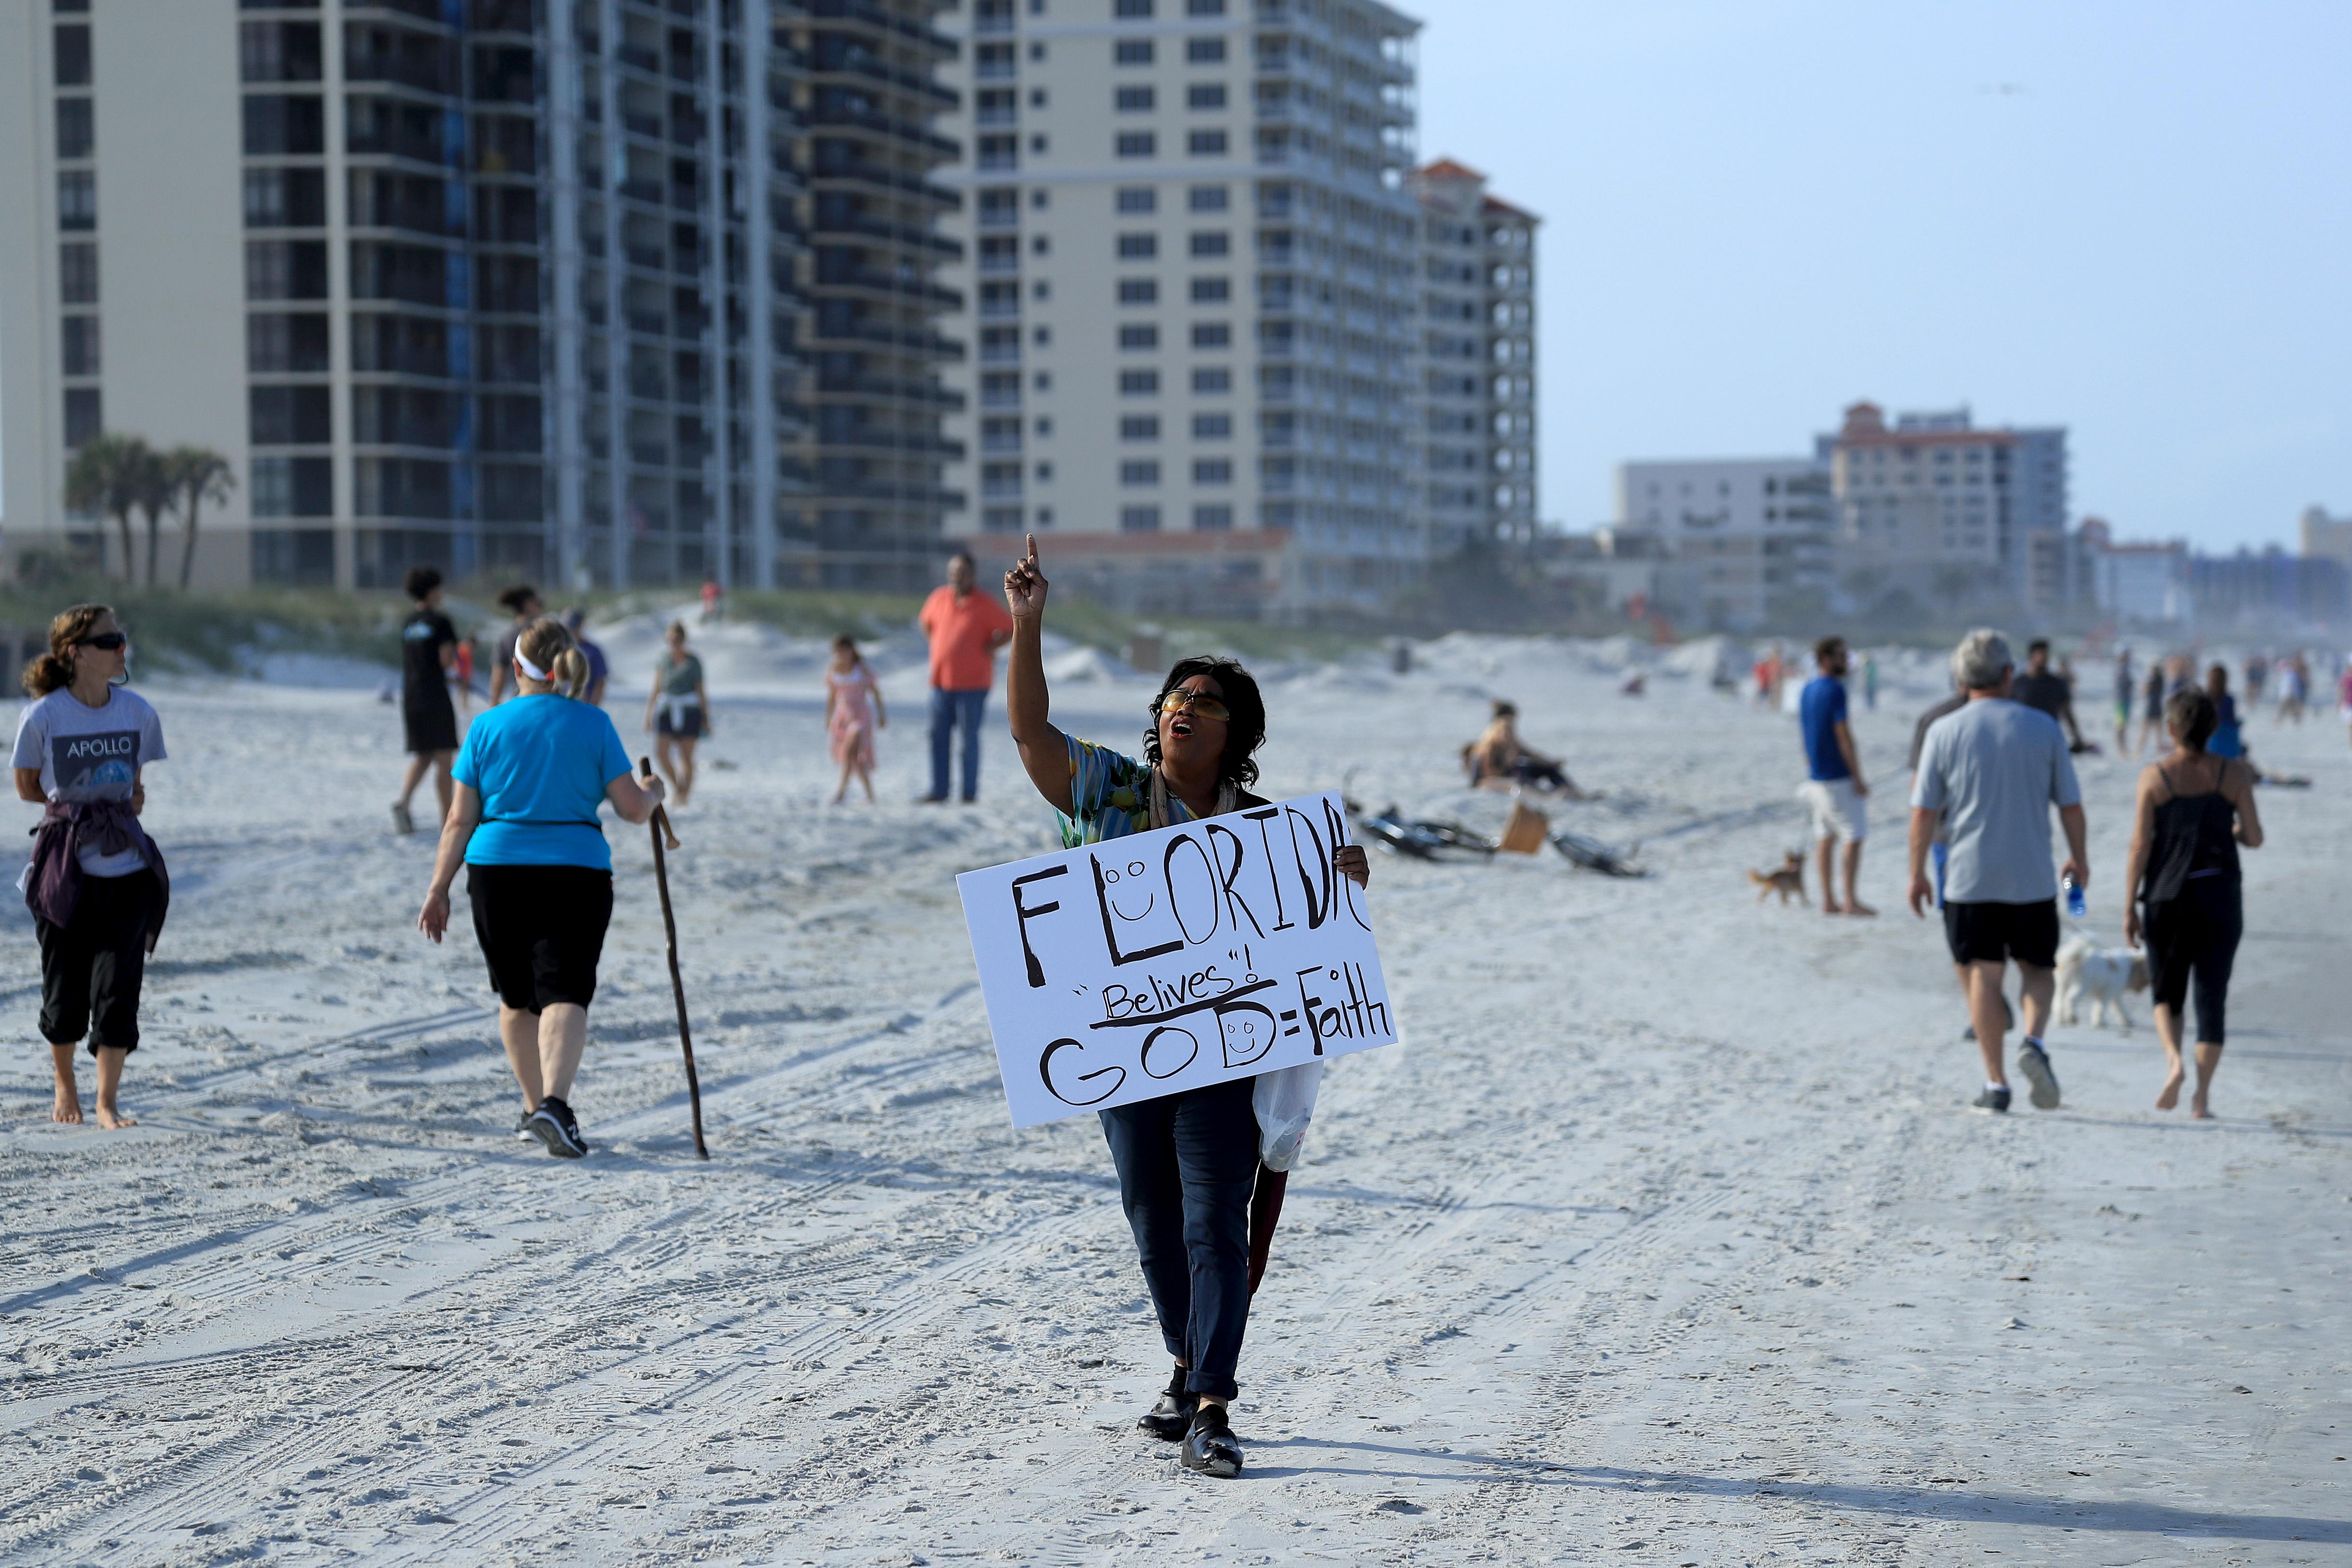 People walking on the beach. One person carries a sign that says "Florida belives! God = Faith."